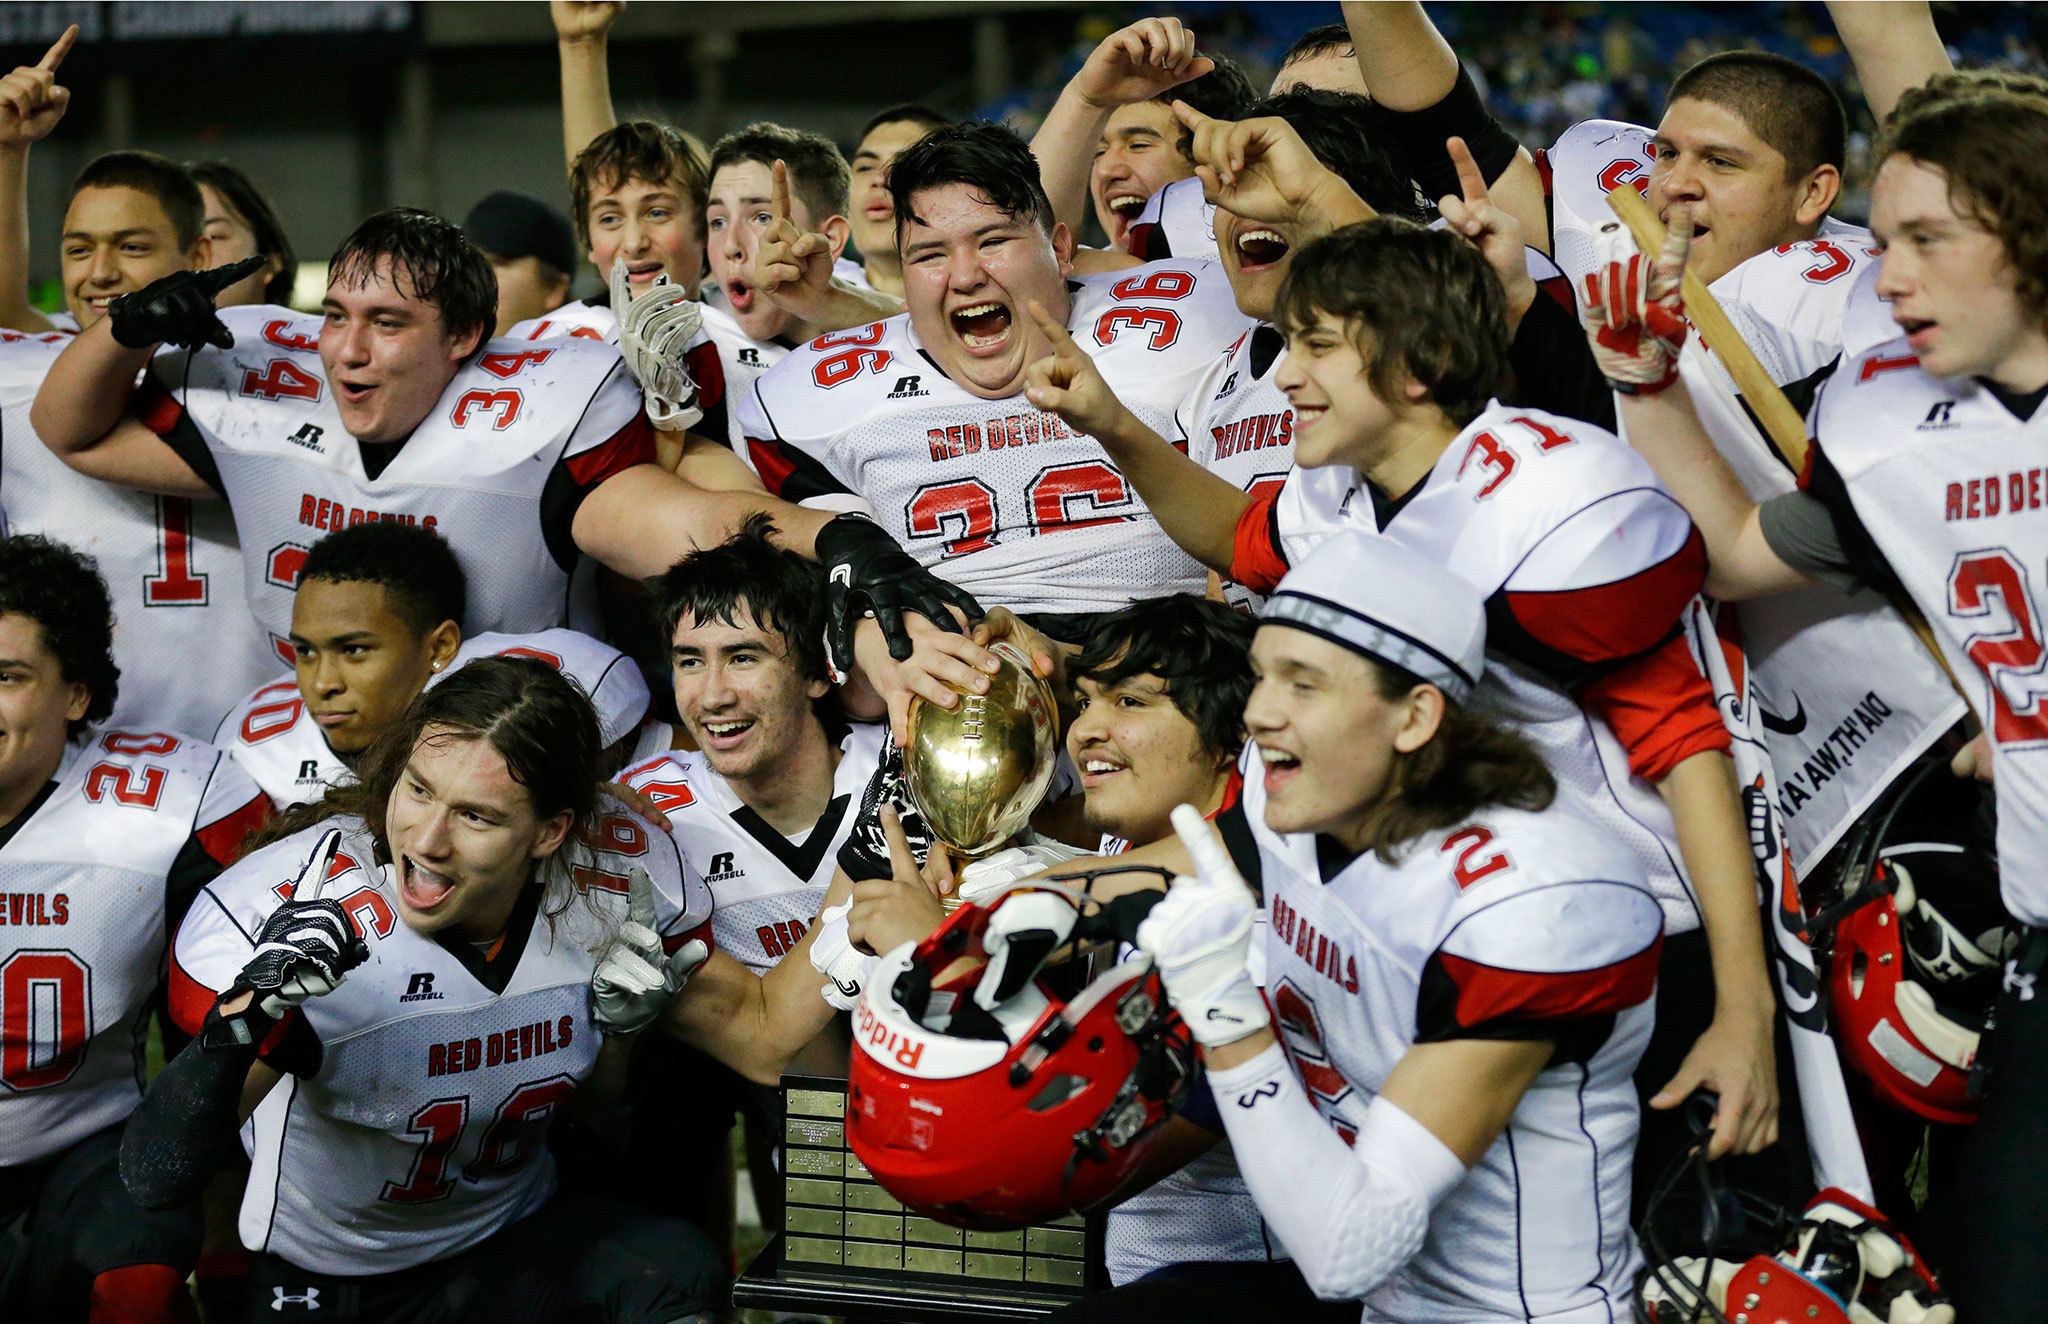 Associated Press                                Neah Bay players, including Matt Reamer (36) yell as they celebrate with the trophy after they beat Odessa-Harrington 64-34 in the Washington Div. 1B high school football championship Saturday at the Tacoma Dome.